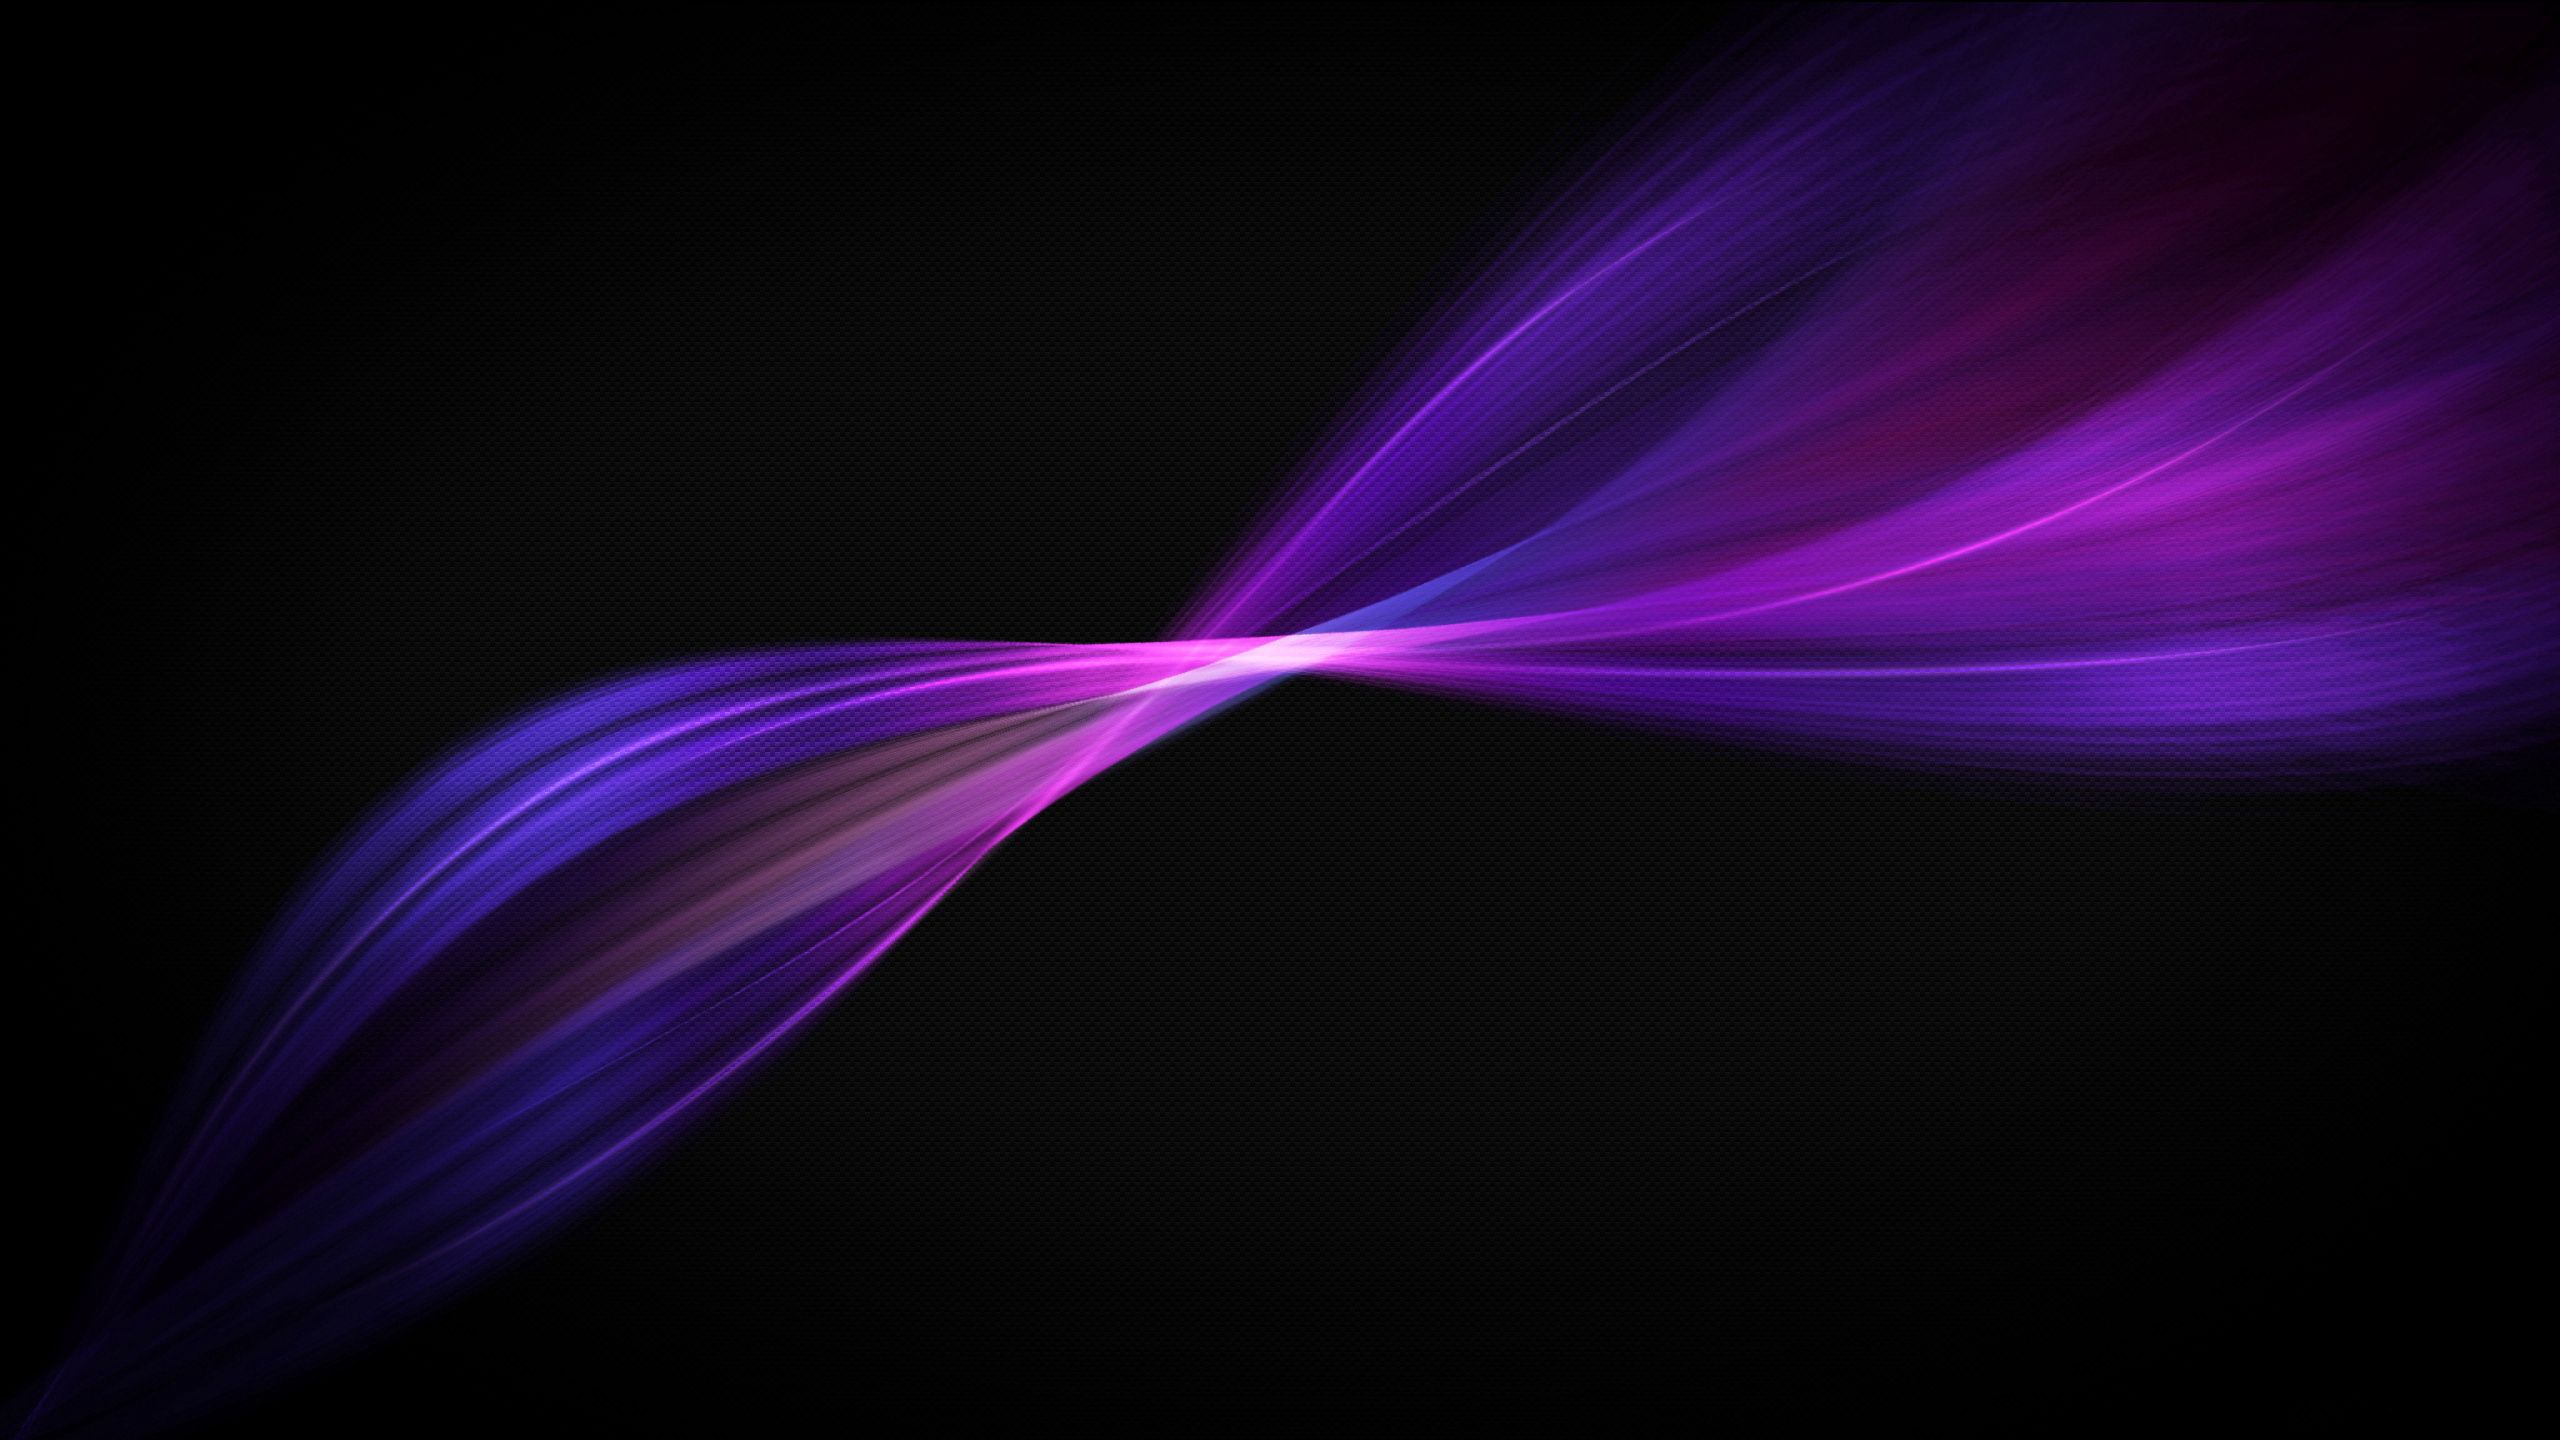 graphics, color, background, purple, black, abstract, violet, lines Phone Background